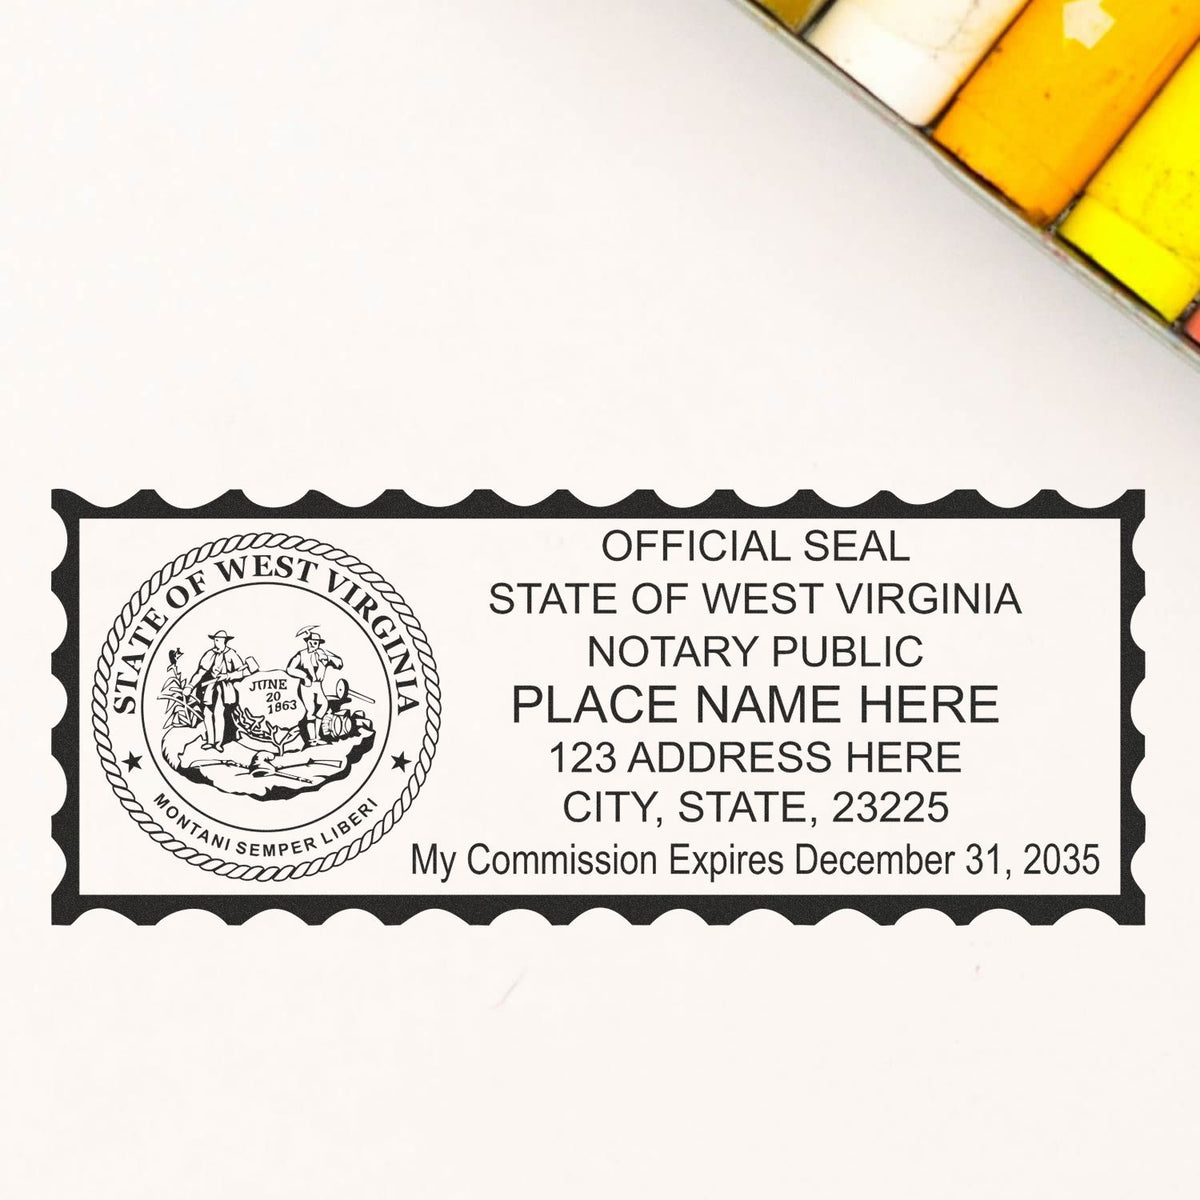 This paper is stamped with a sample imprint of the Super Slim West Virginia Notary Public Stamp, signifying its quality and reliability.